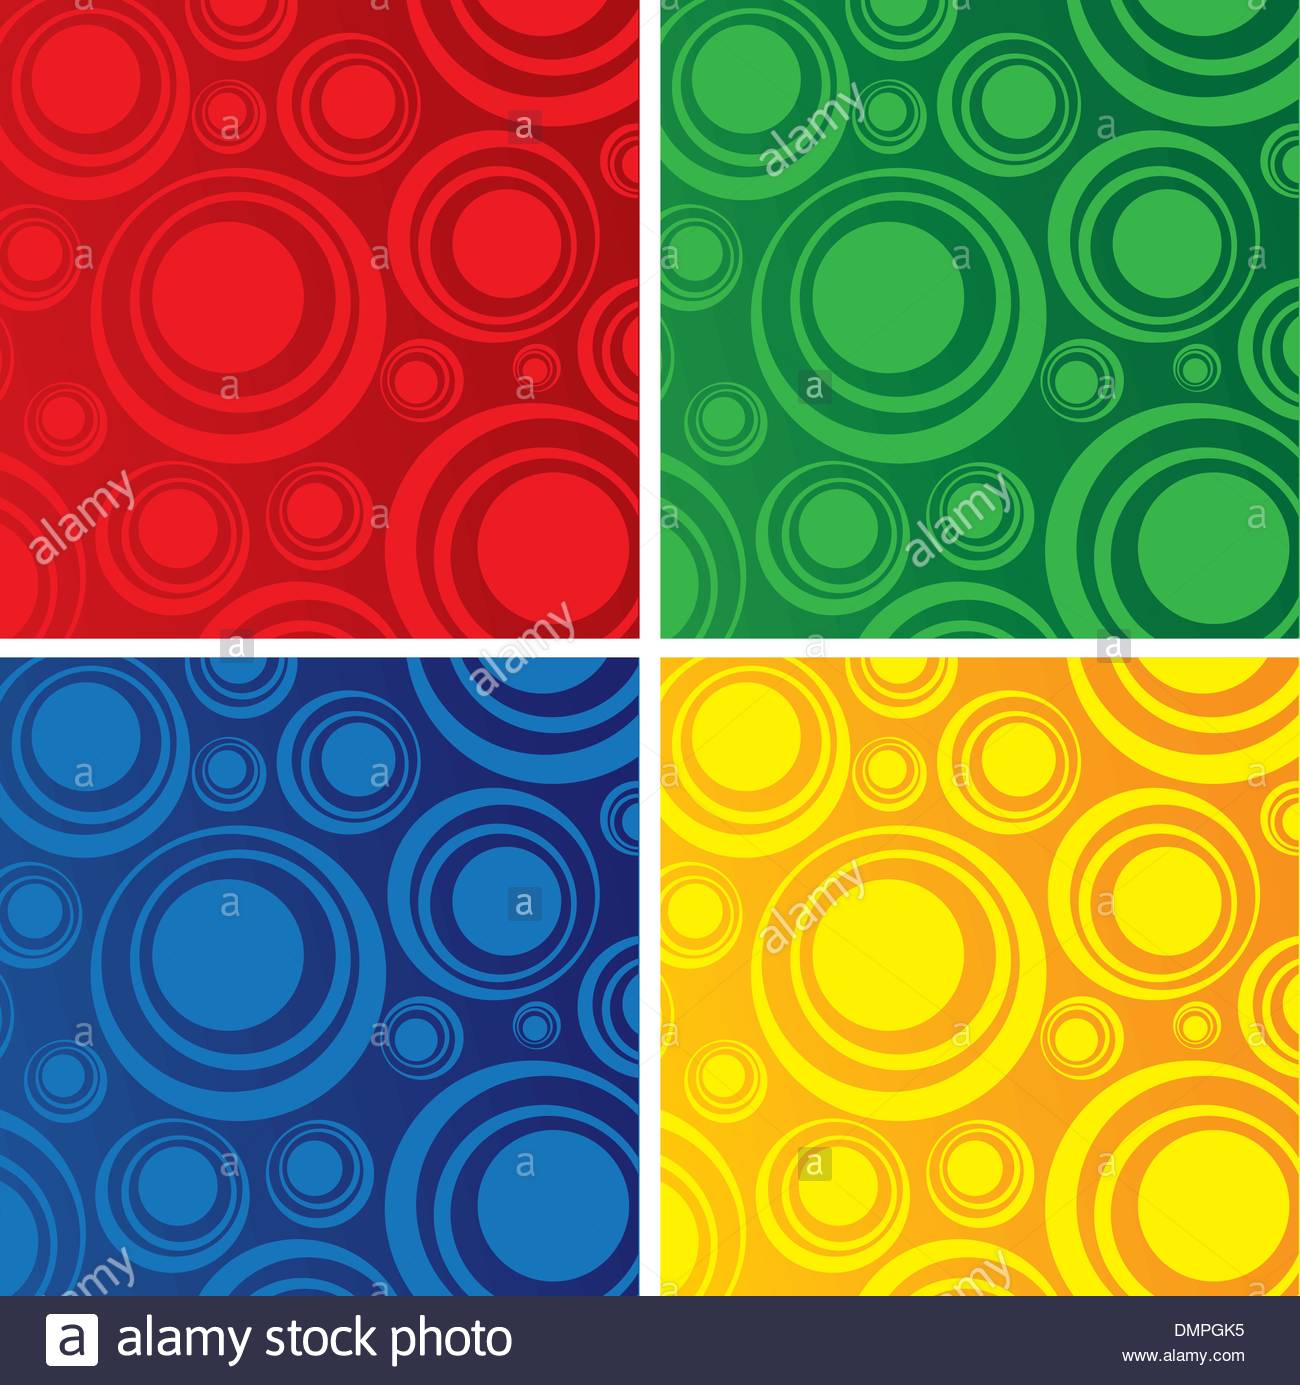 Four Colorful And Whimsical Background Stock Vector Image Art